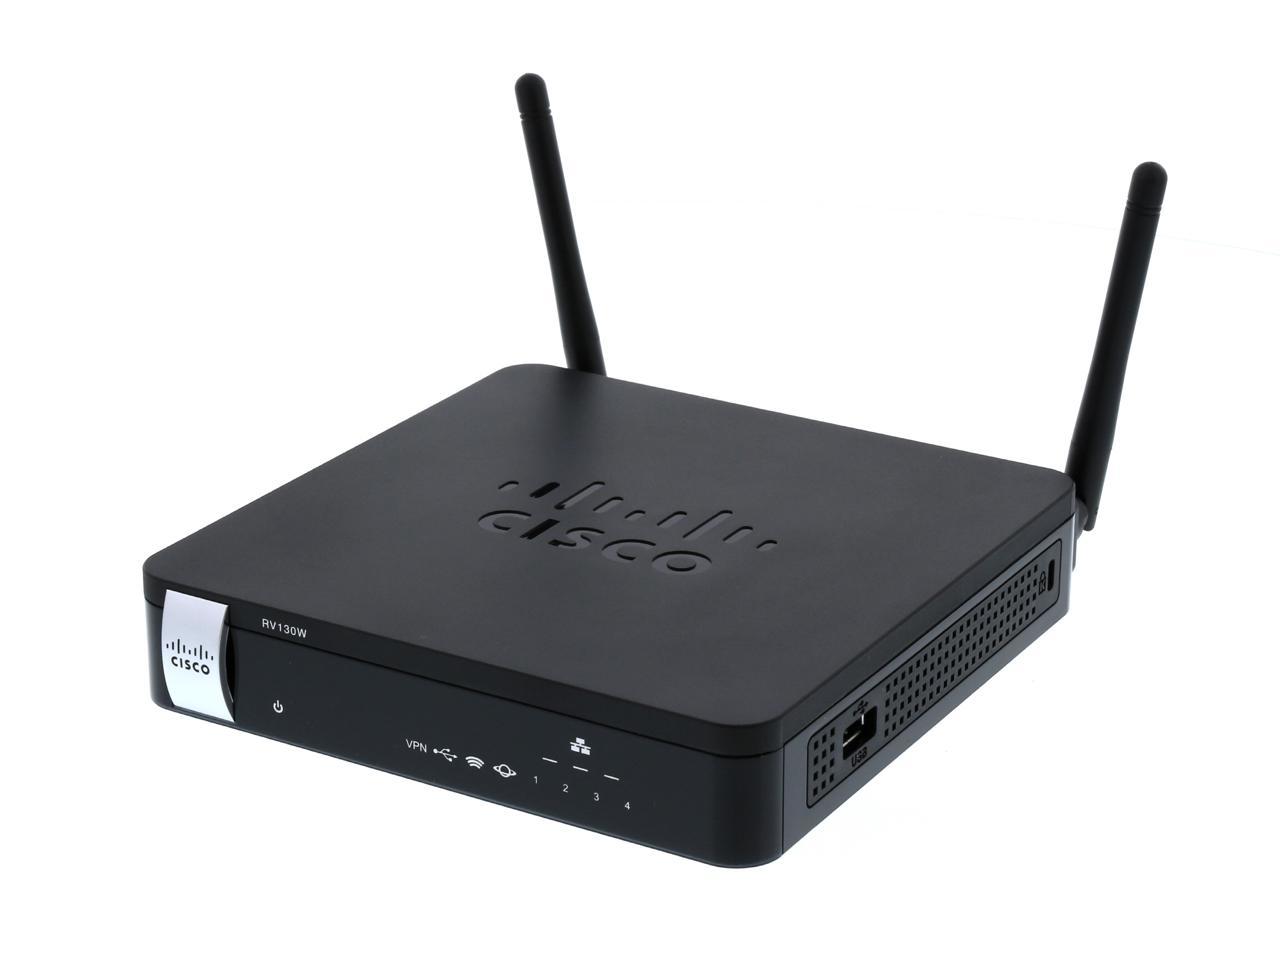 cisco small business routers reviews